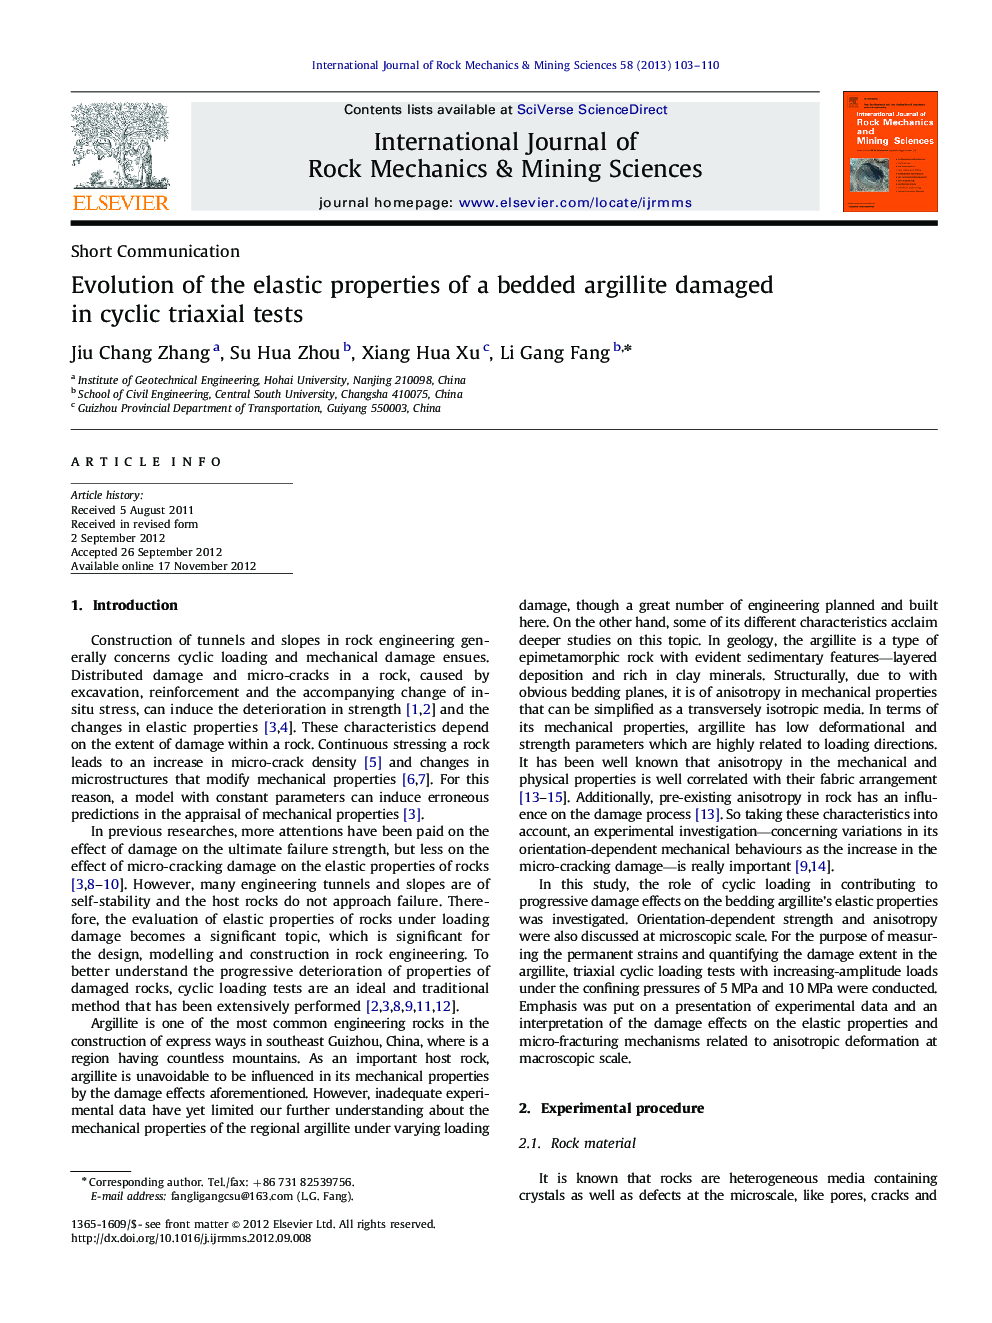 Evolution of the elastic properties of a bedded argillite damaged in cyclic triaxial tests